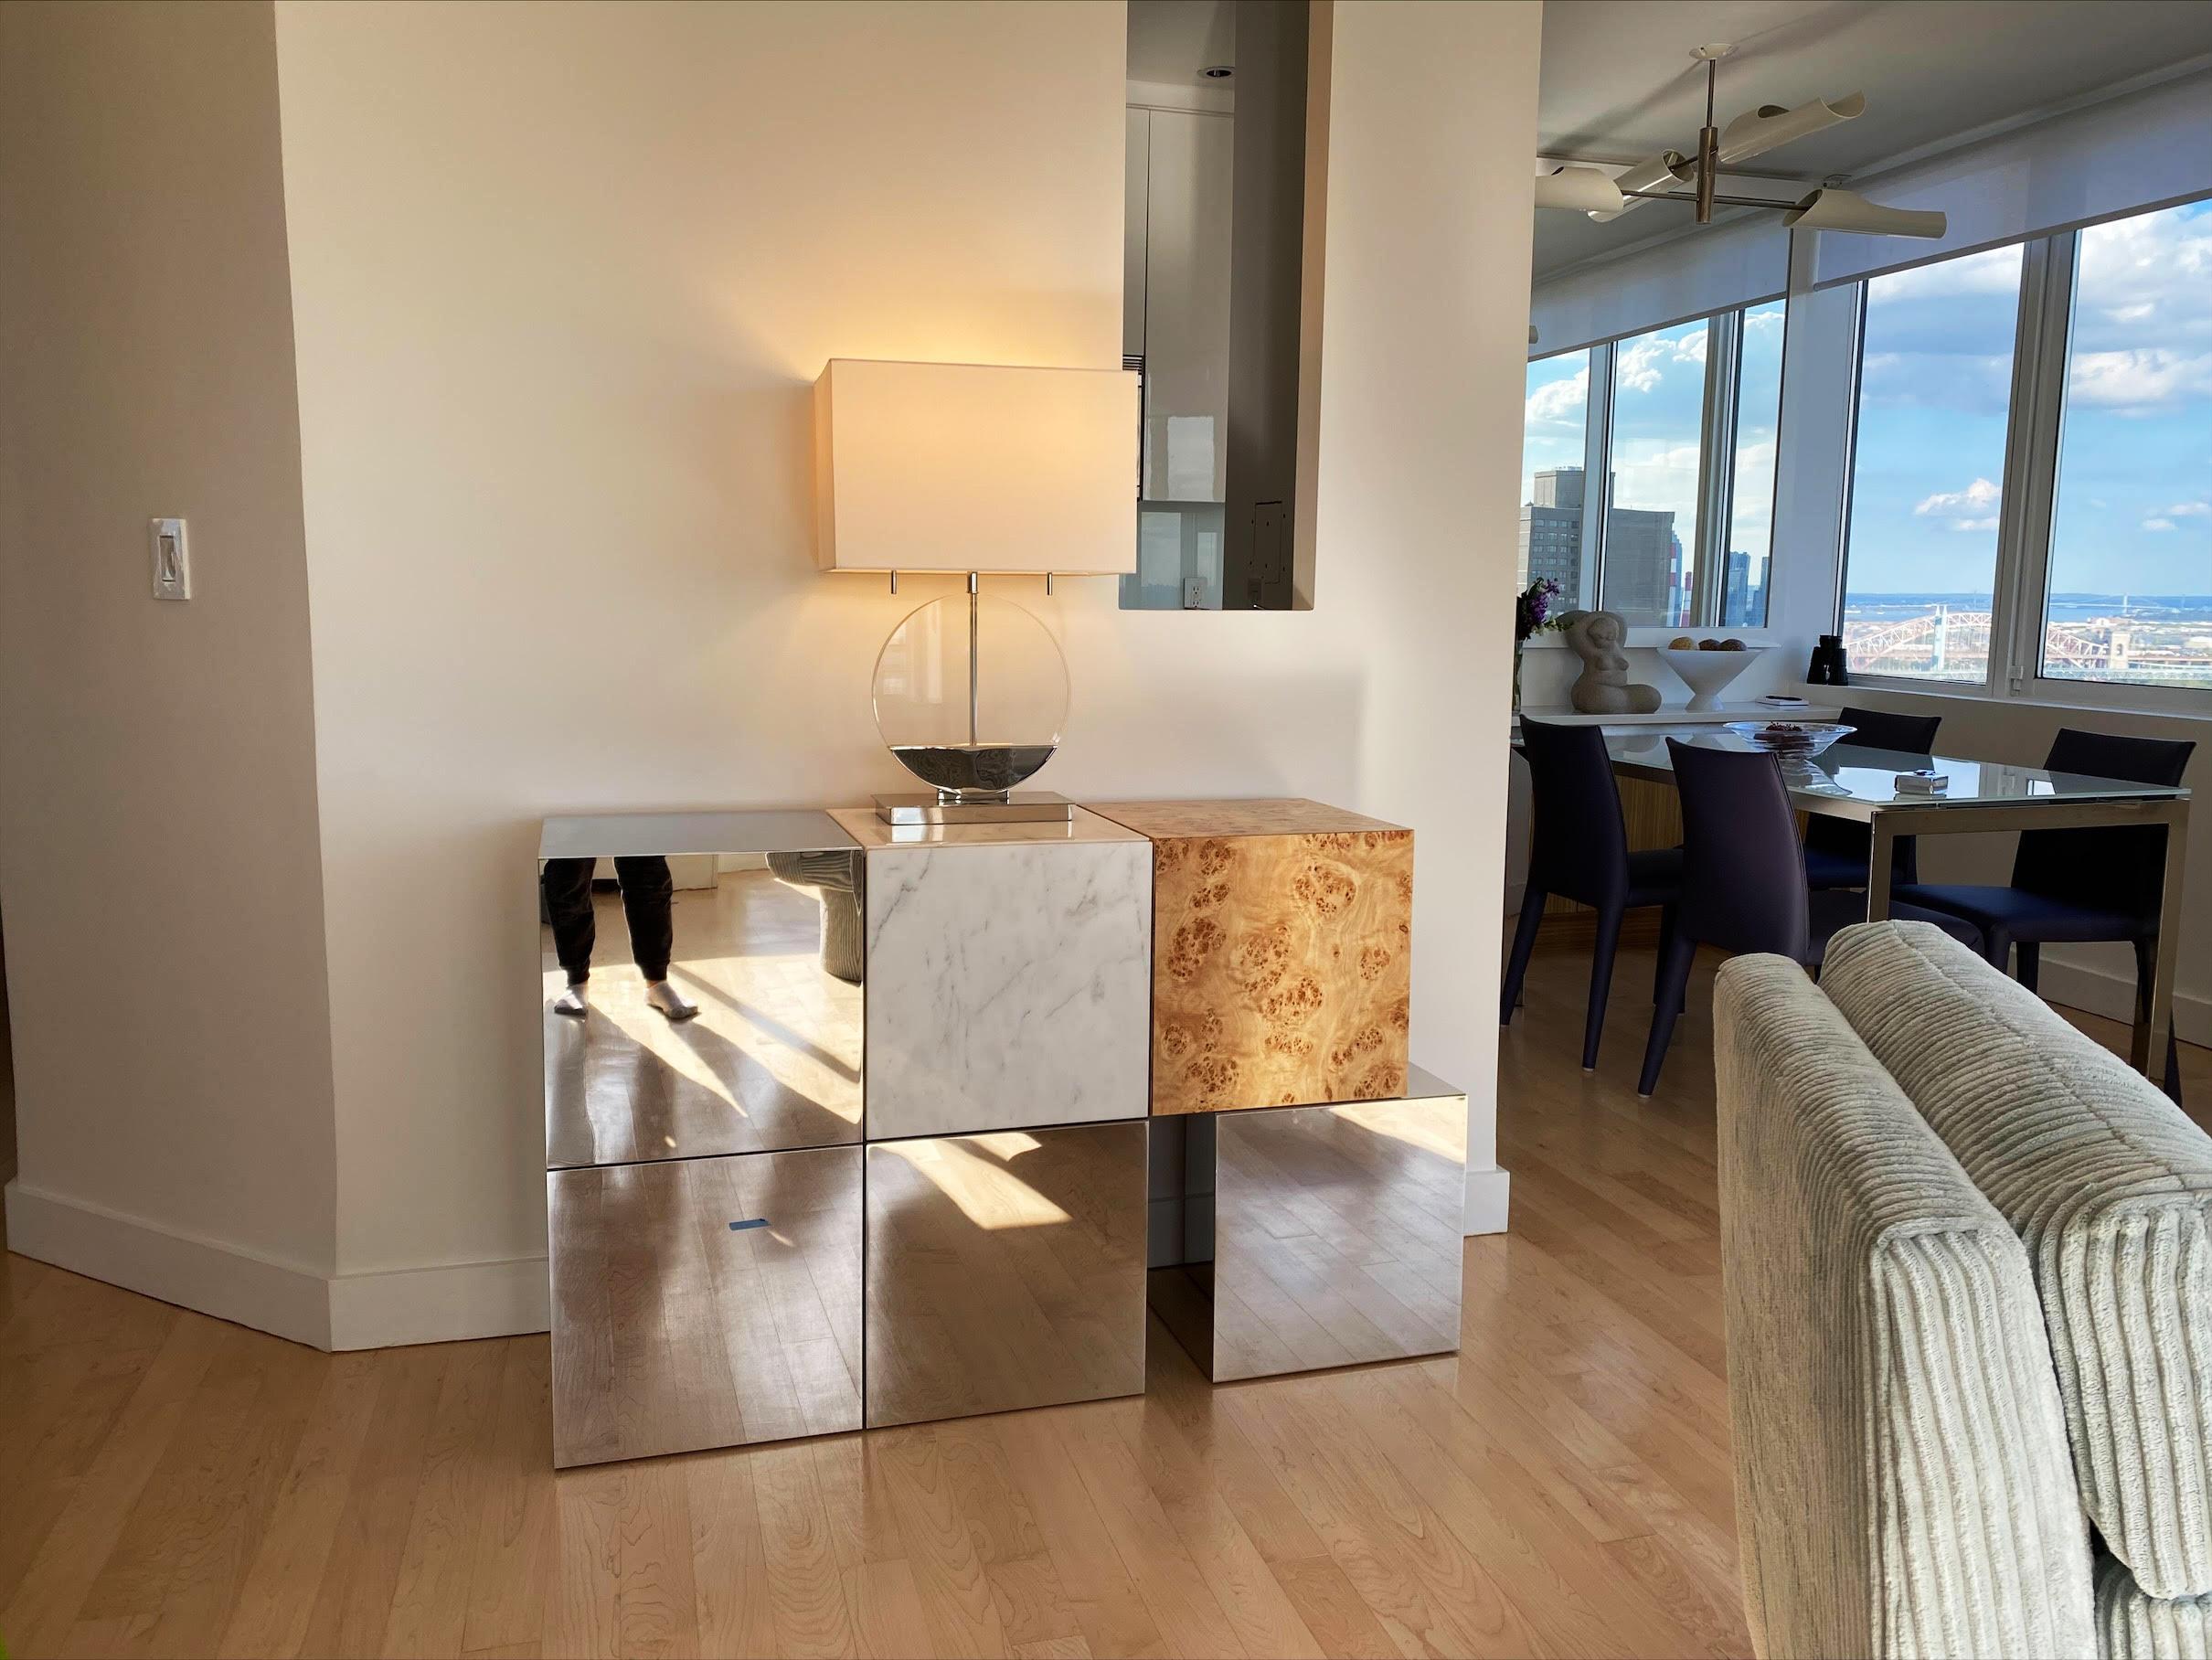 Cabinet CUCU

CUCU cabinet by Railis Design is the perfect addition to any modern living room or dining room. Store away your plates or knickknacks in a stylish way. Made of polar root veneer, white marble and polished stainless steel! Interior